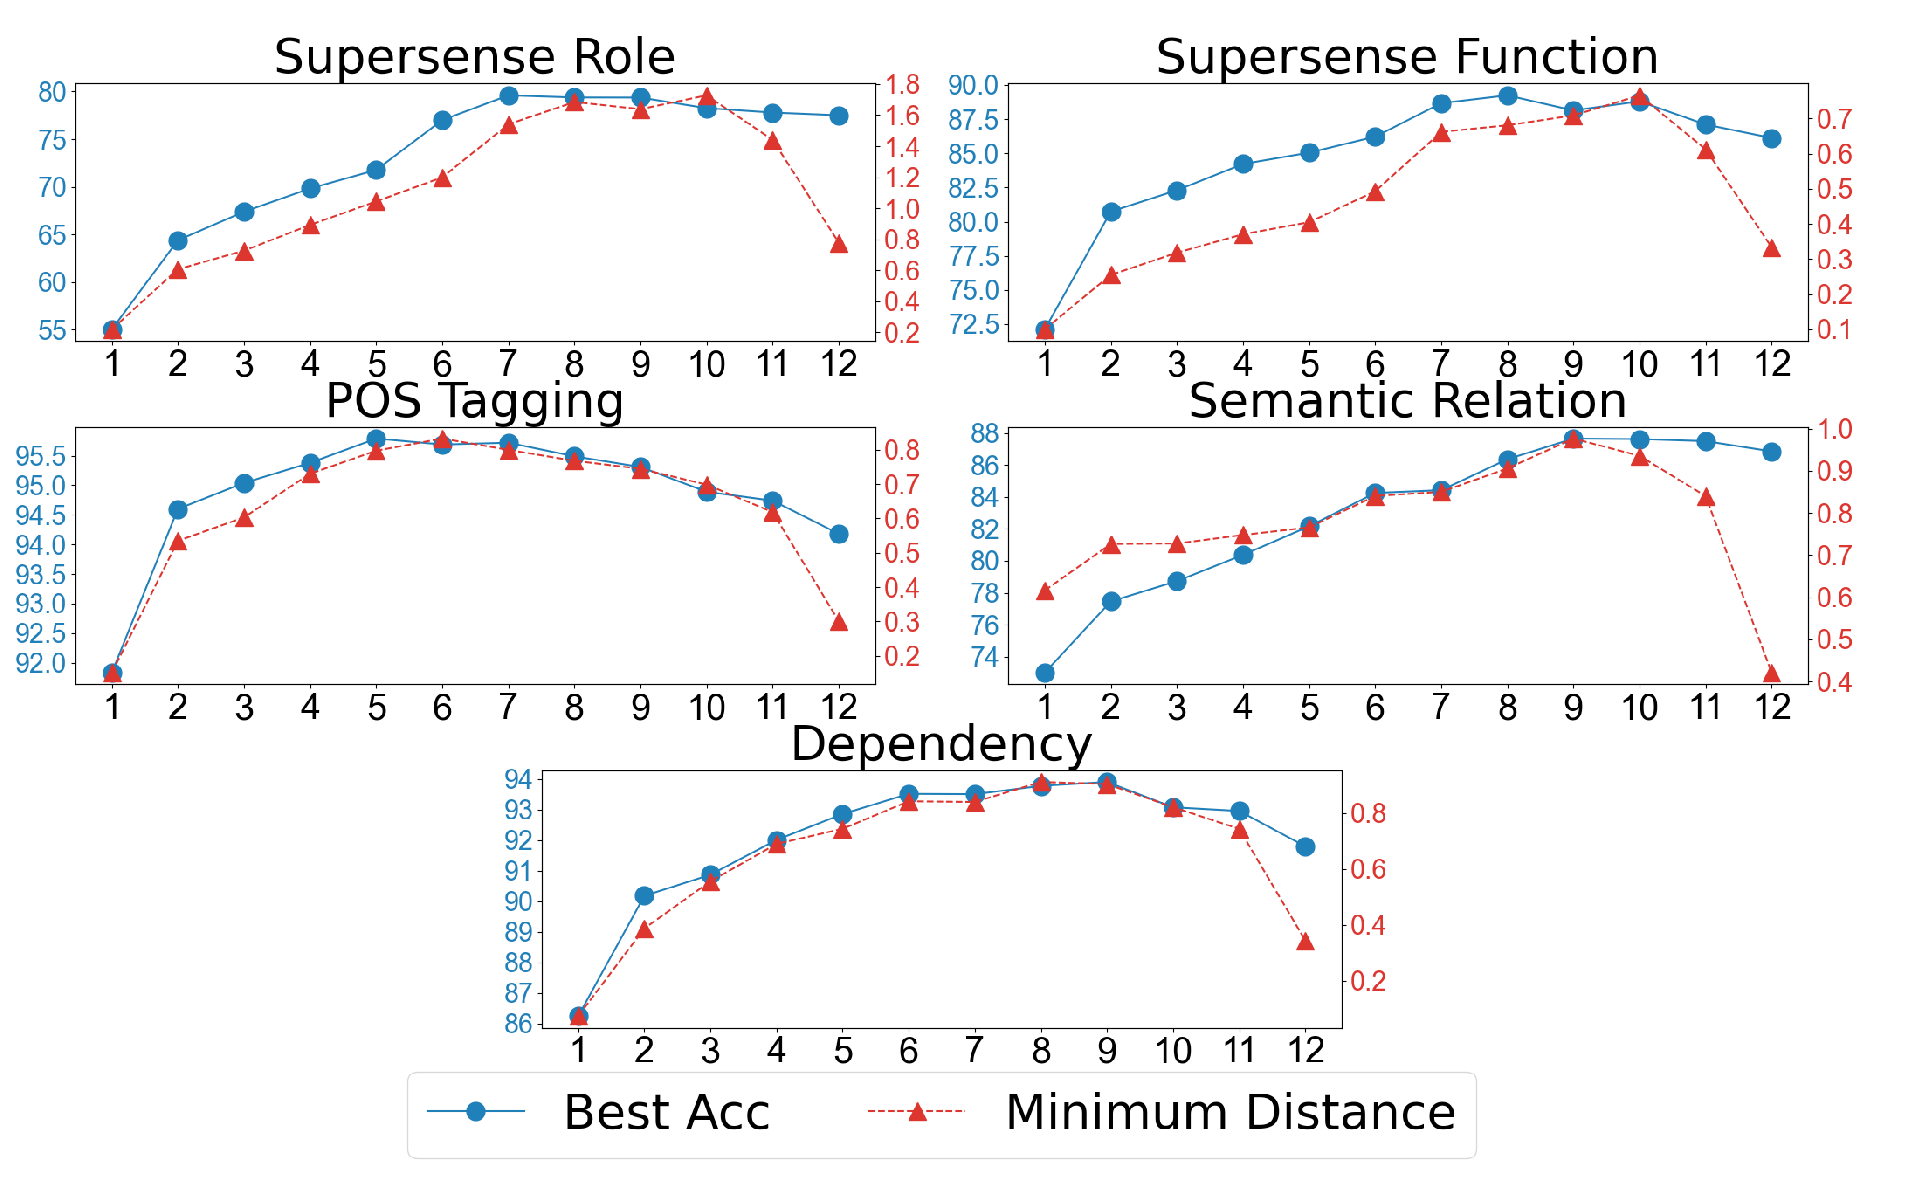 Minimum distances between clusters v.s. the best classifier accuracy